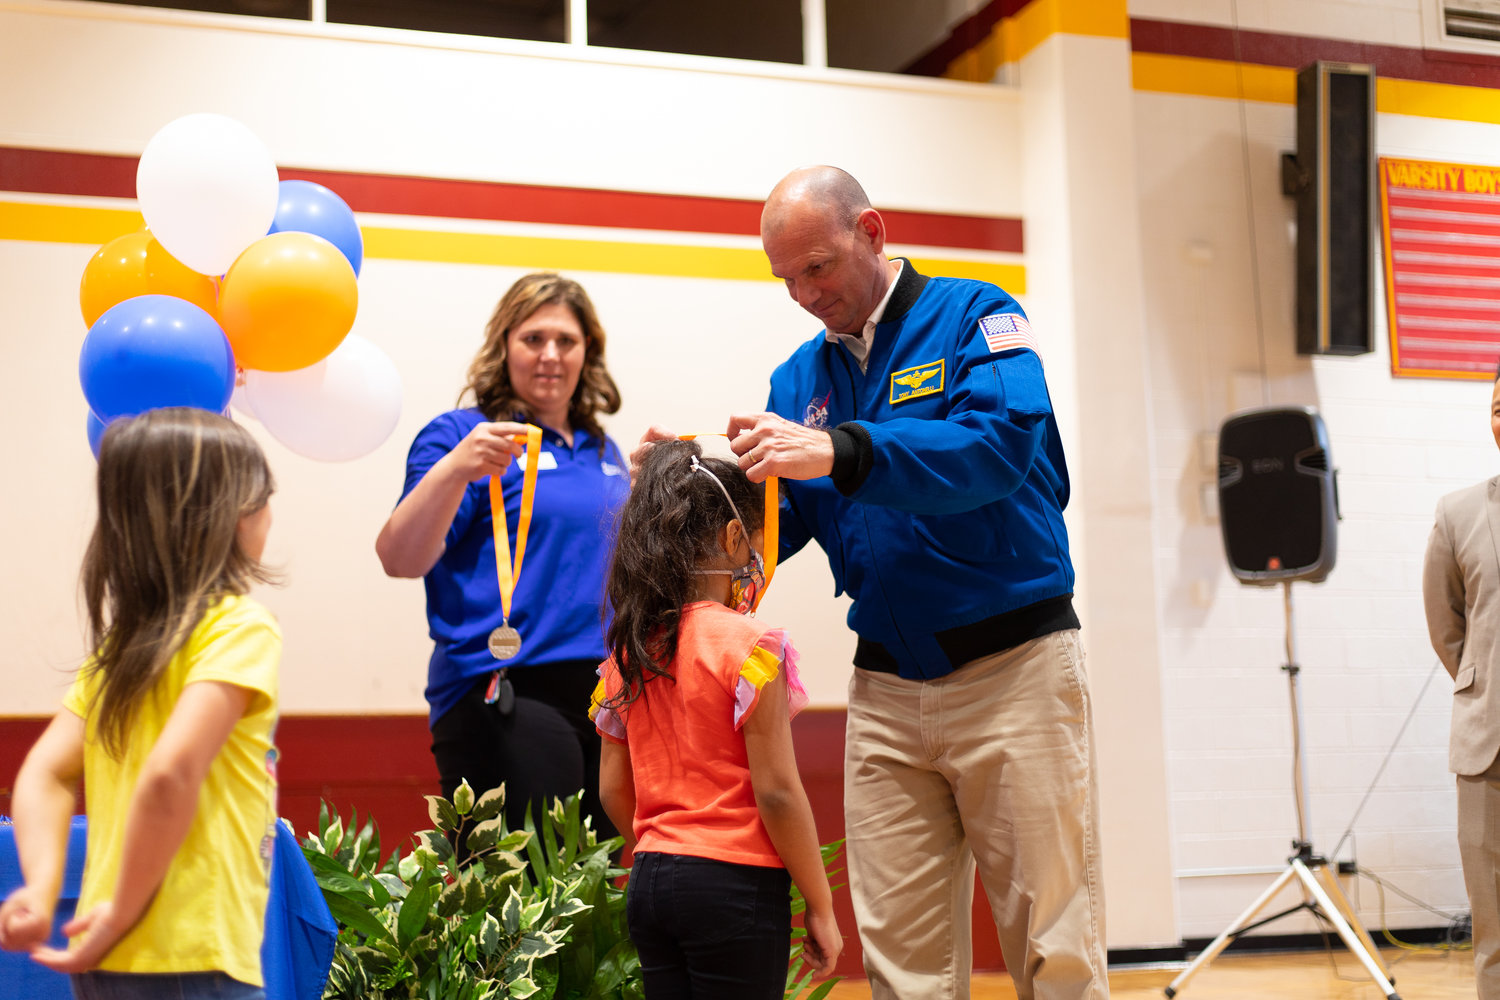 Tony Antonelli places a medal on Jr. Astronaut Design Challenge winners from Cumberland Mills Elementary School.